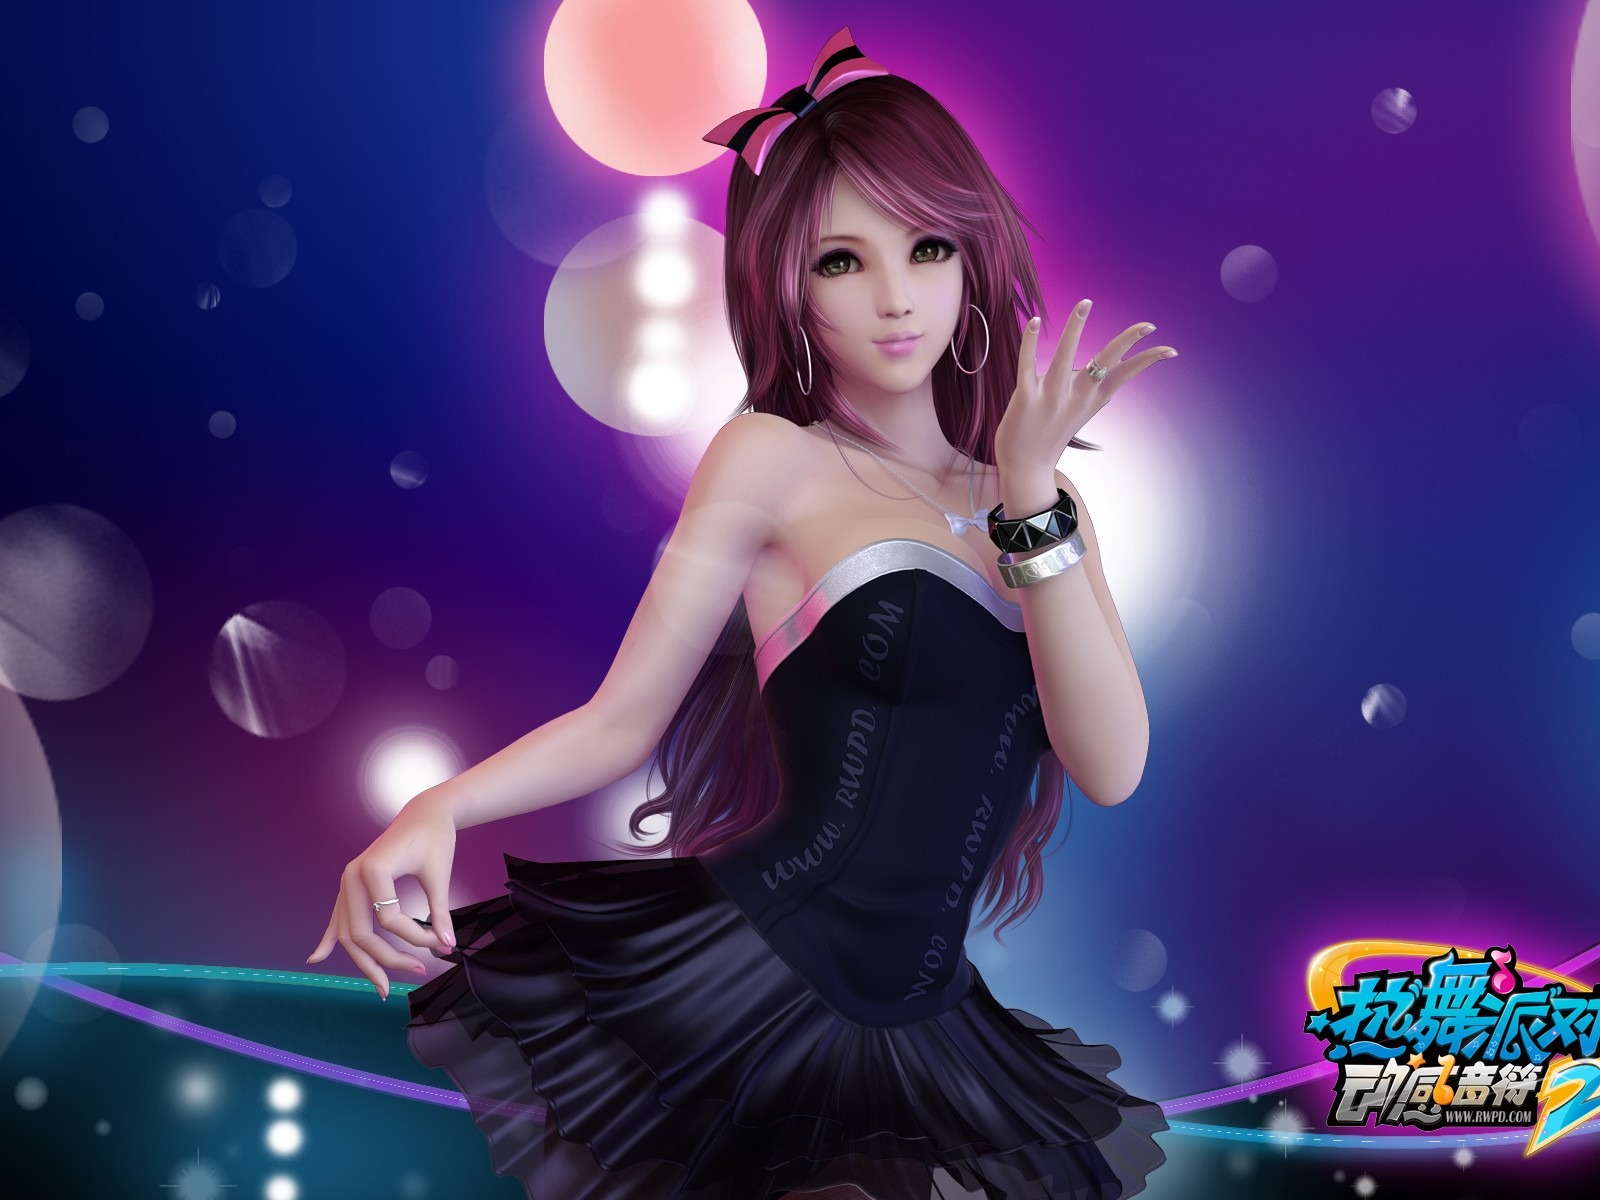 Online game Hot Dance Party II official wallpapers #32 - 1600x1200